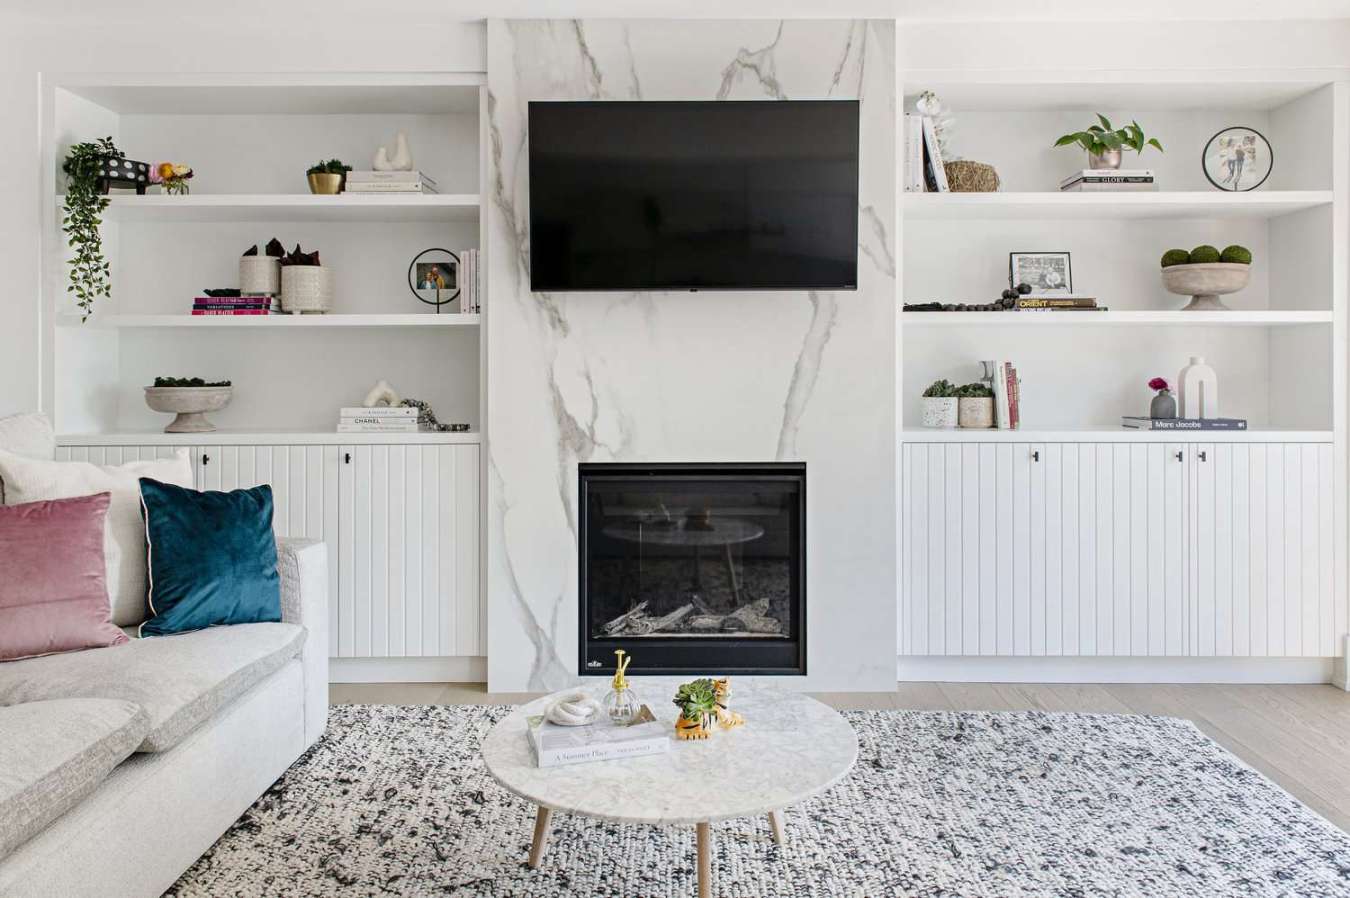 Sleek Electric Fireplace Ideas With a TV Above